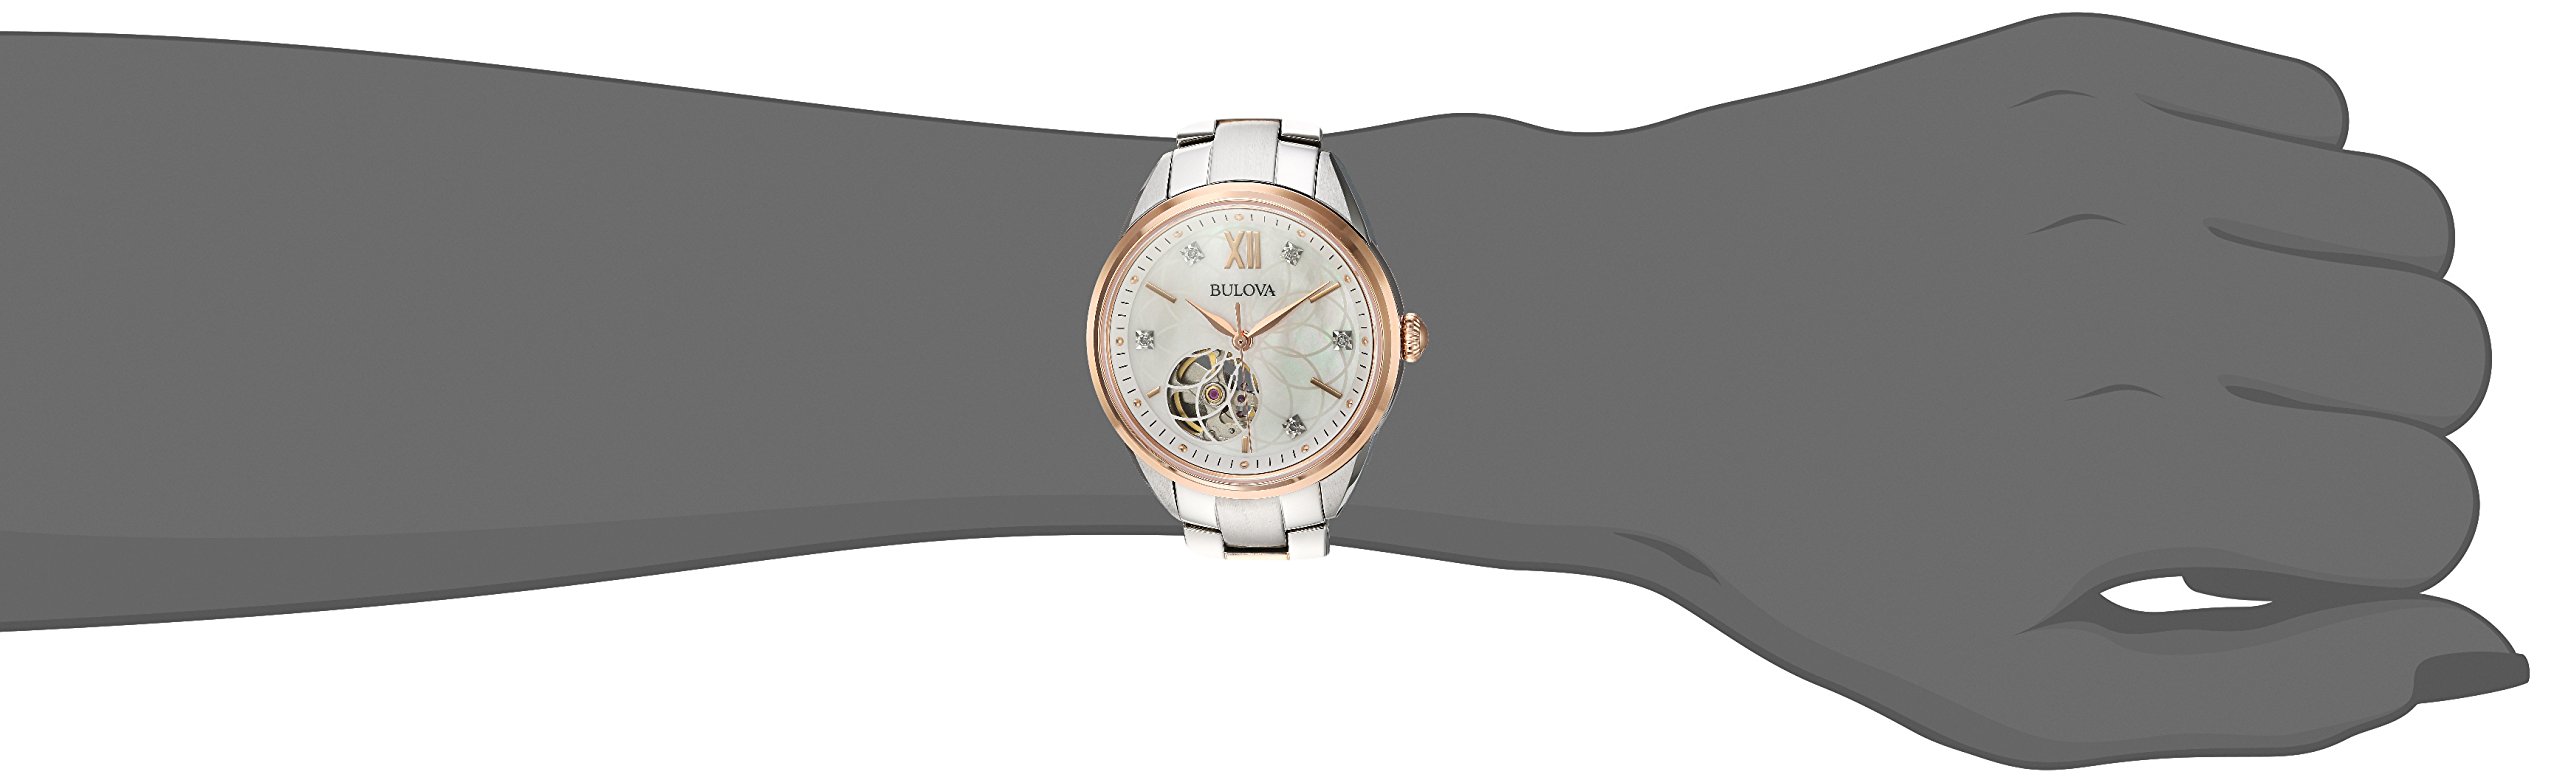 Bulova Ladies' Classic Diamond 3-Hand Automatic in Stainless Steel, Mother-of-Pearl Dial and Open Aperture Dial